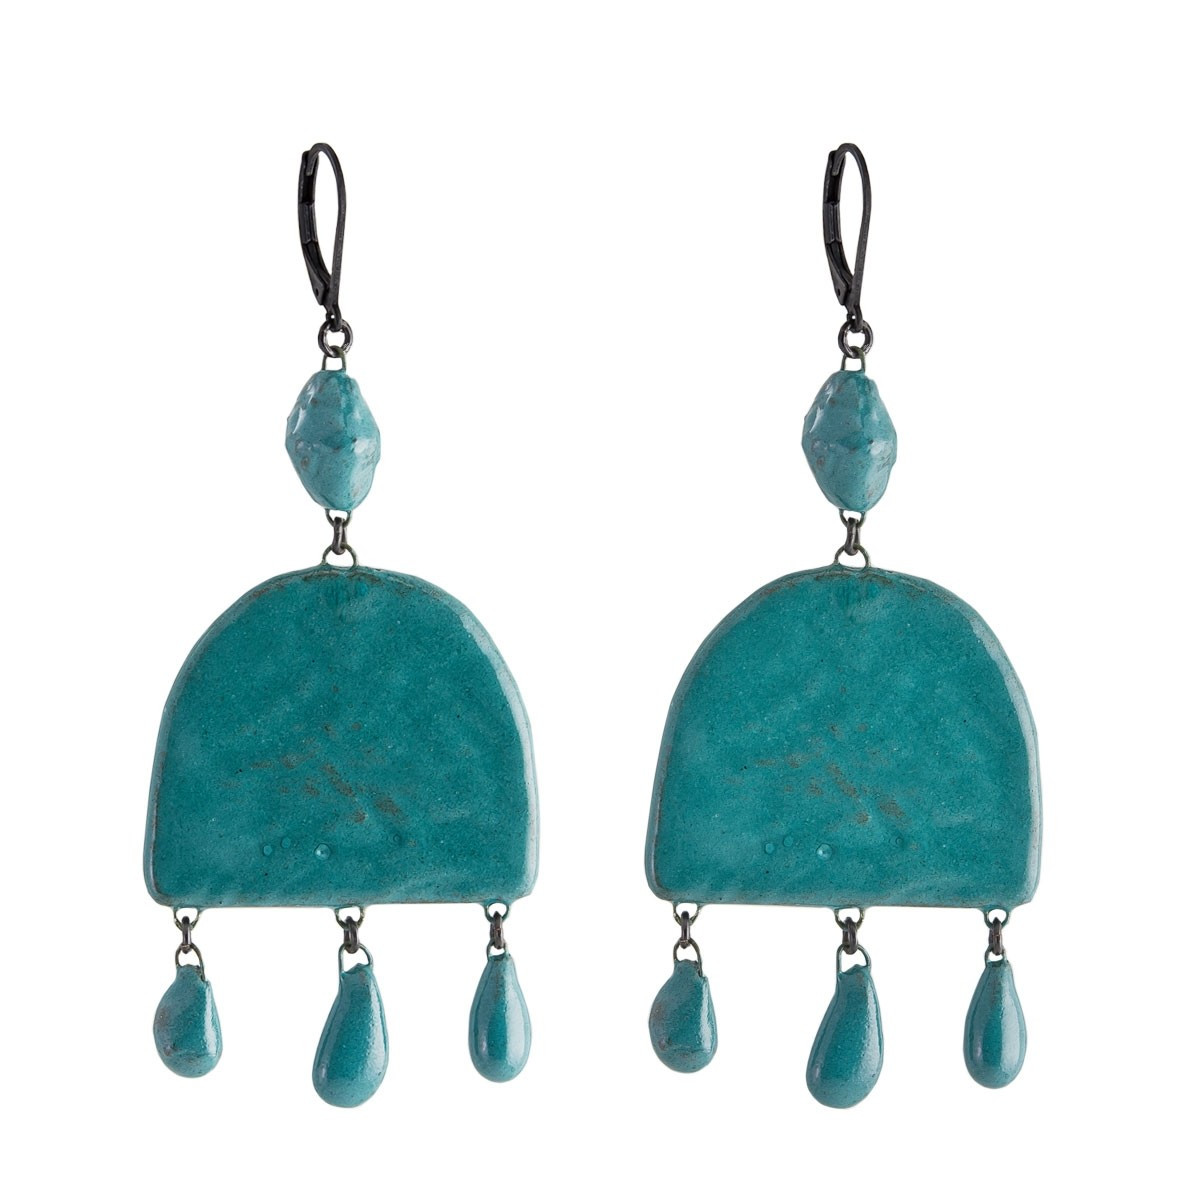 cyclades earrings, tomfoolery, Claire Hequet-Chaut